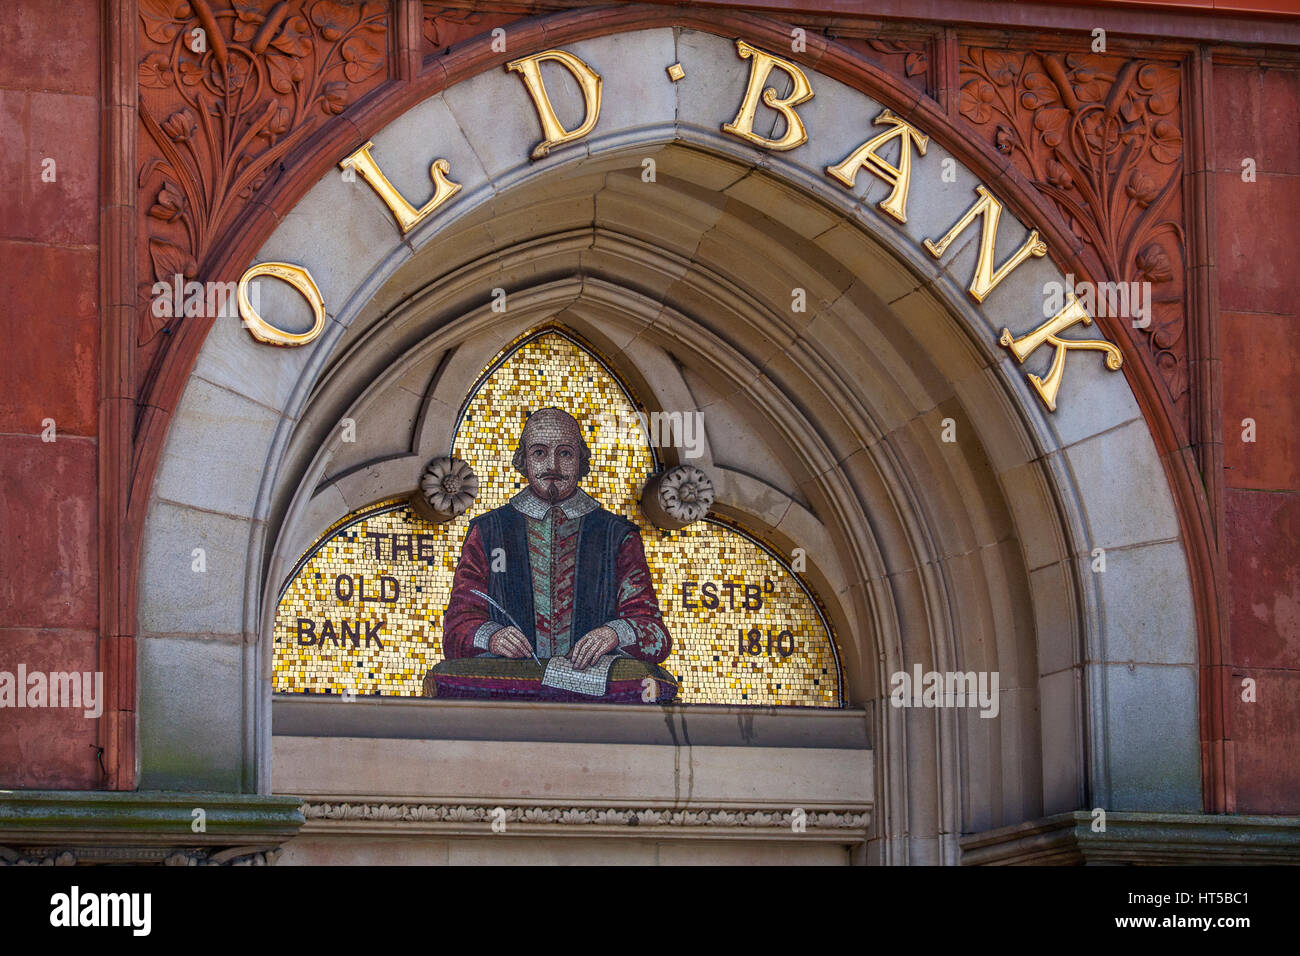 A mosaic of famous playwright and poet William Shakespeare above the entrance to the Old Bank building in Stratford-Upon-Avon, in the UK. Stock Photo